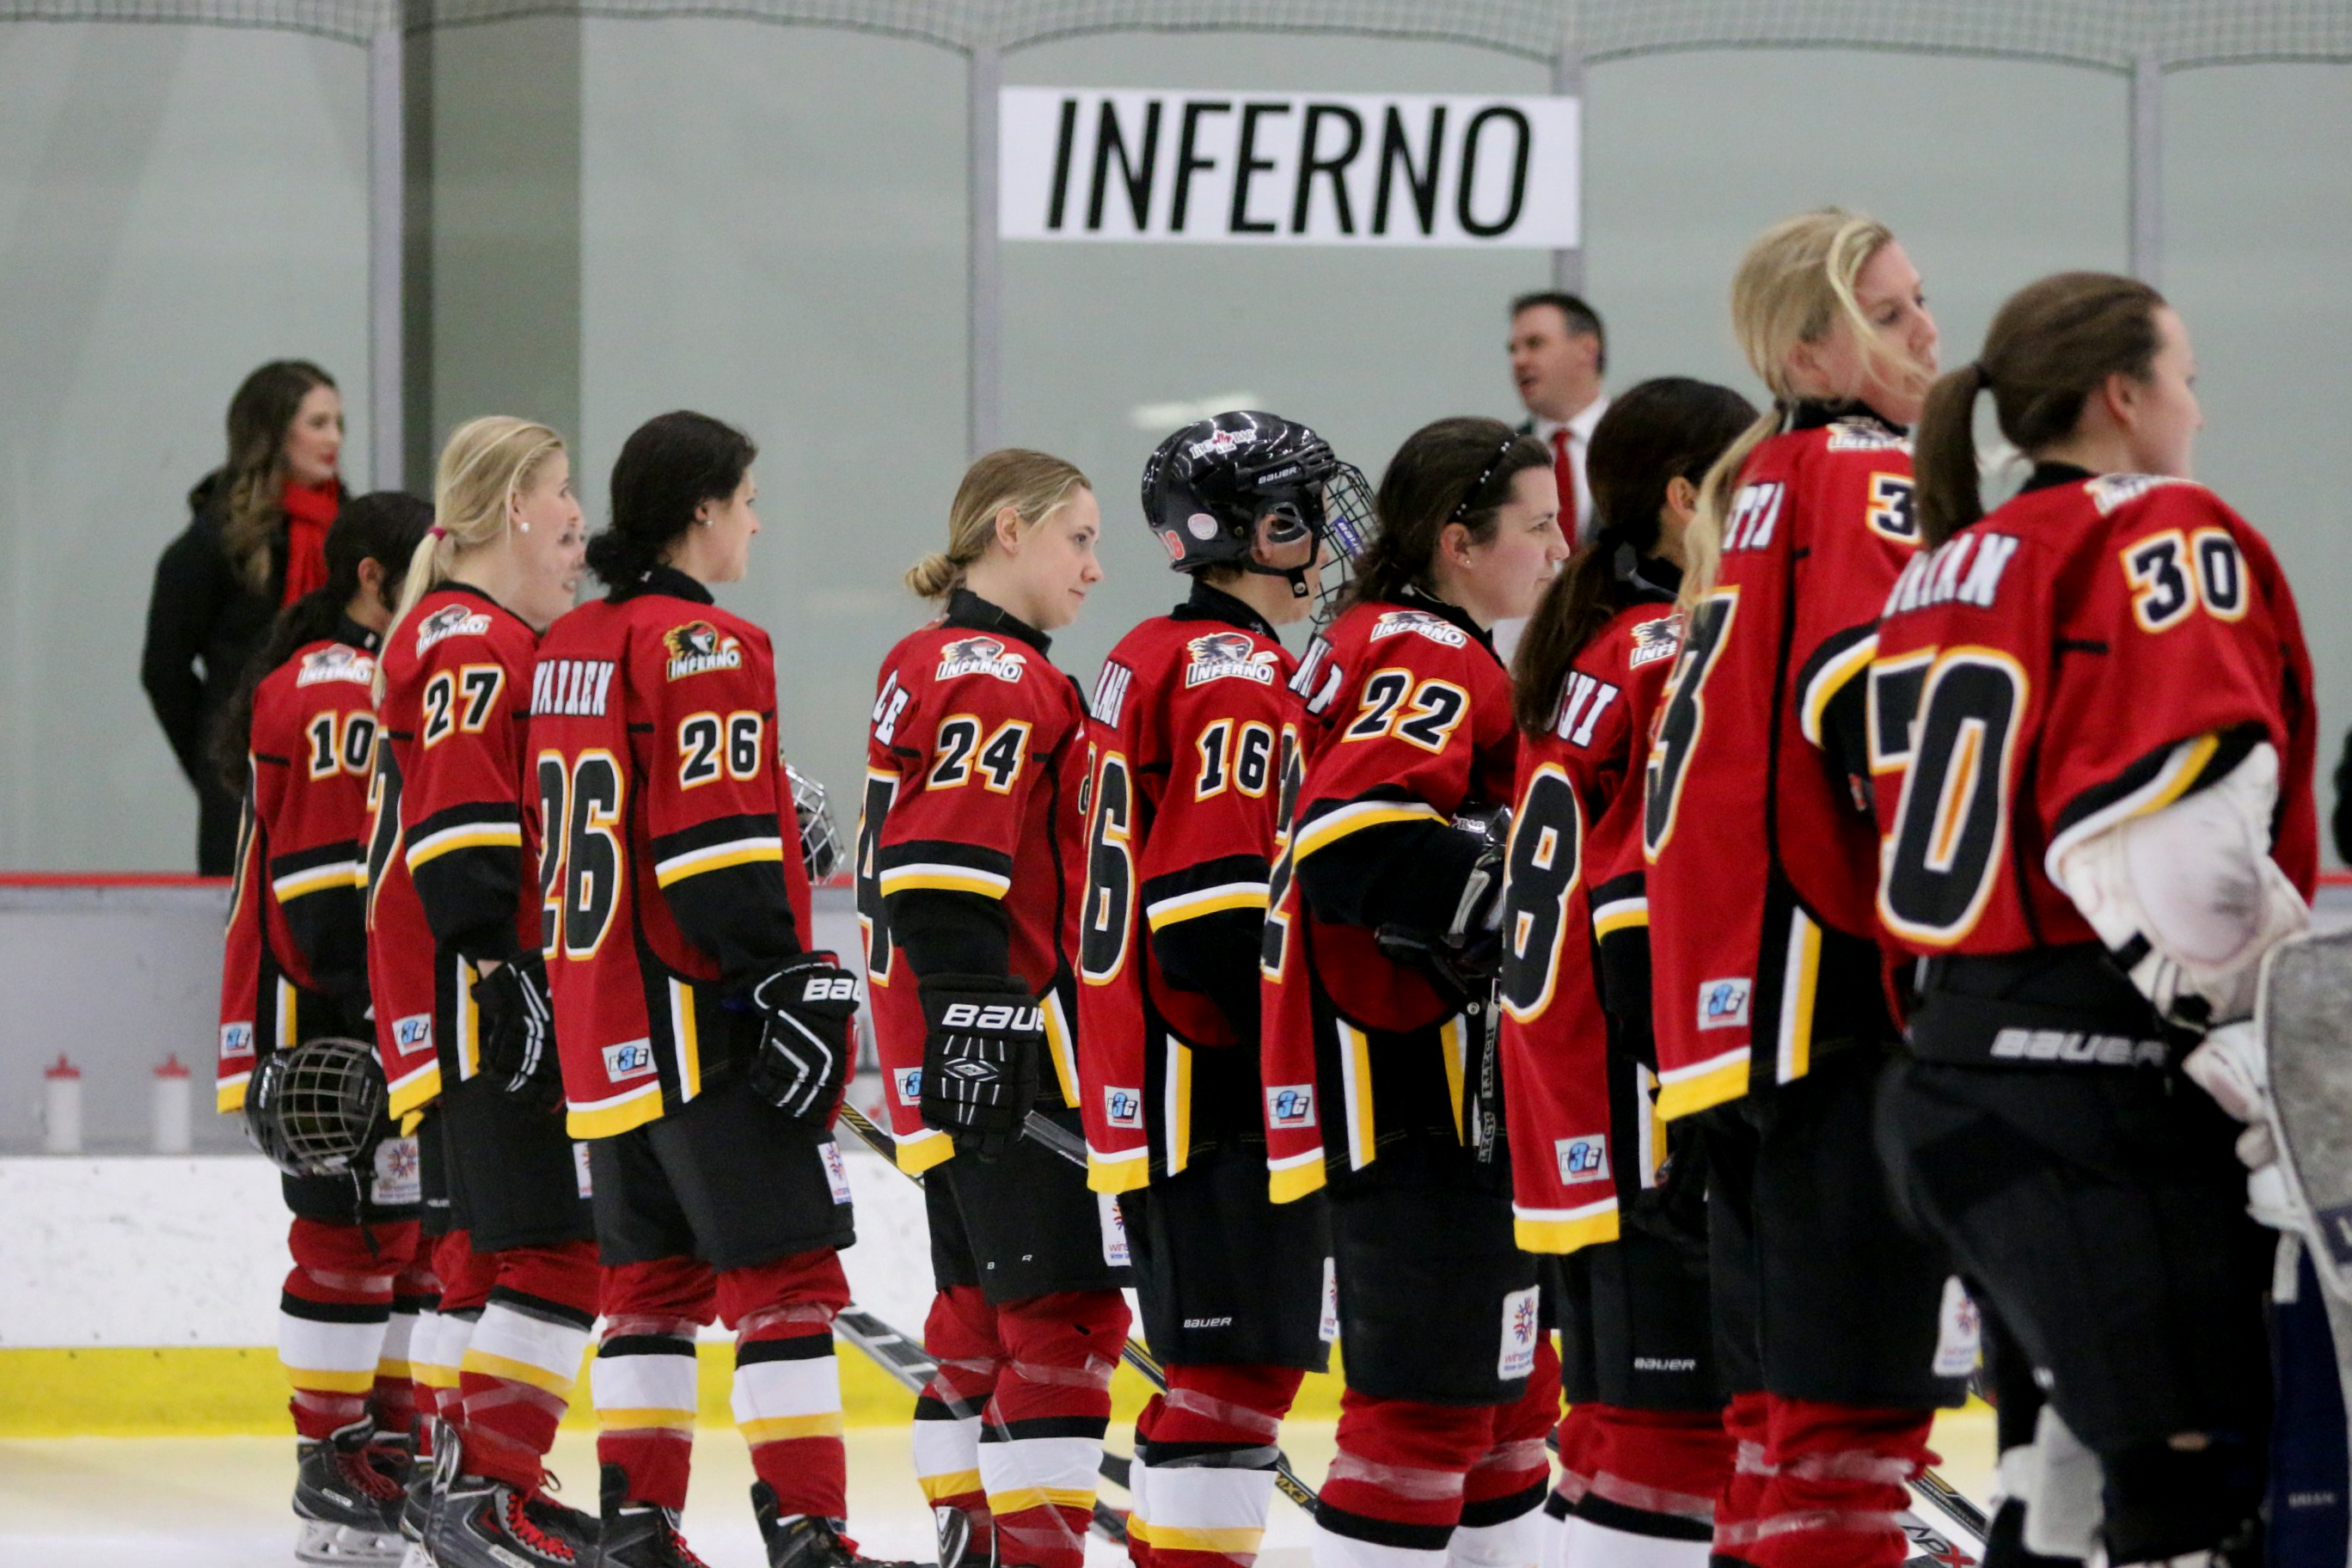 The Inferno have a more manageable schedule to look forward to heading into the 2015-16 CWHL season.